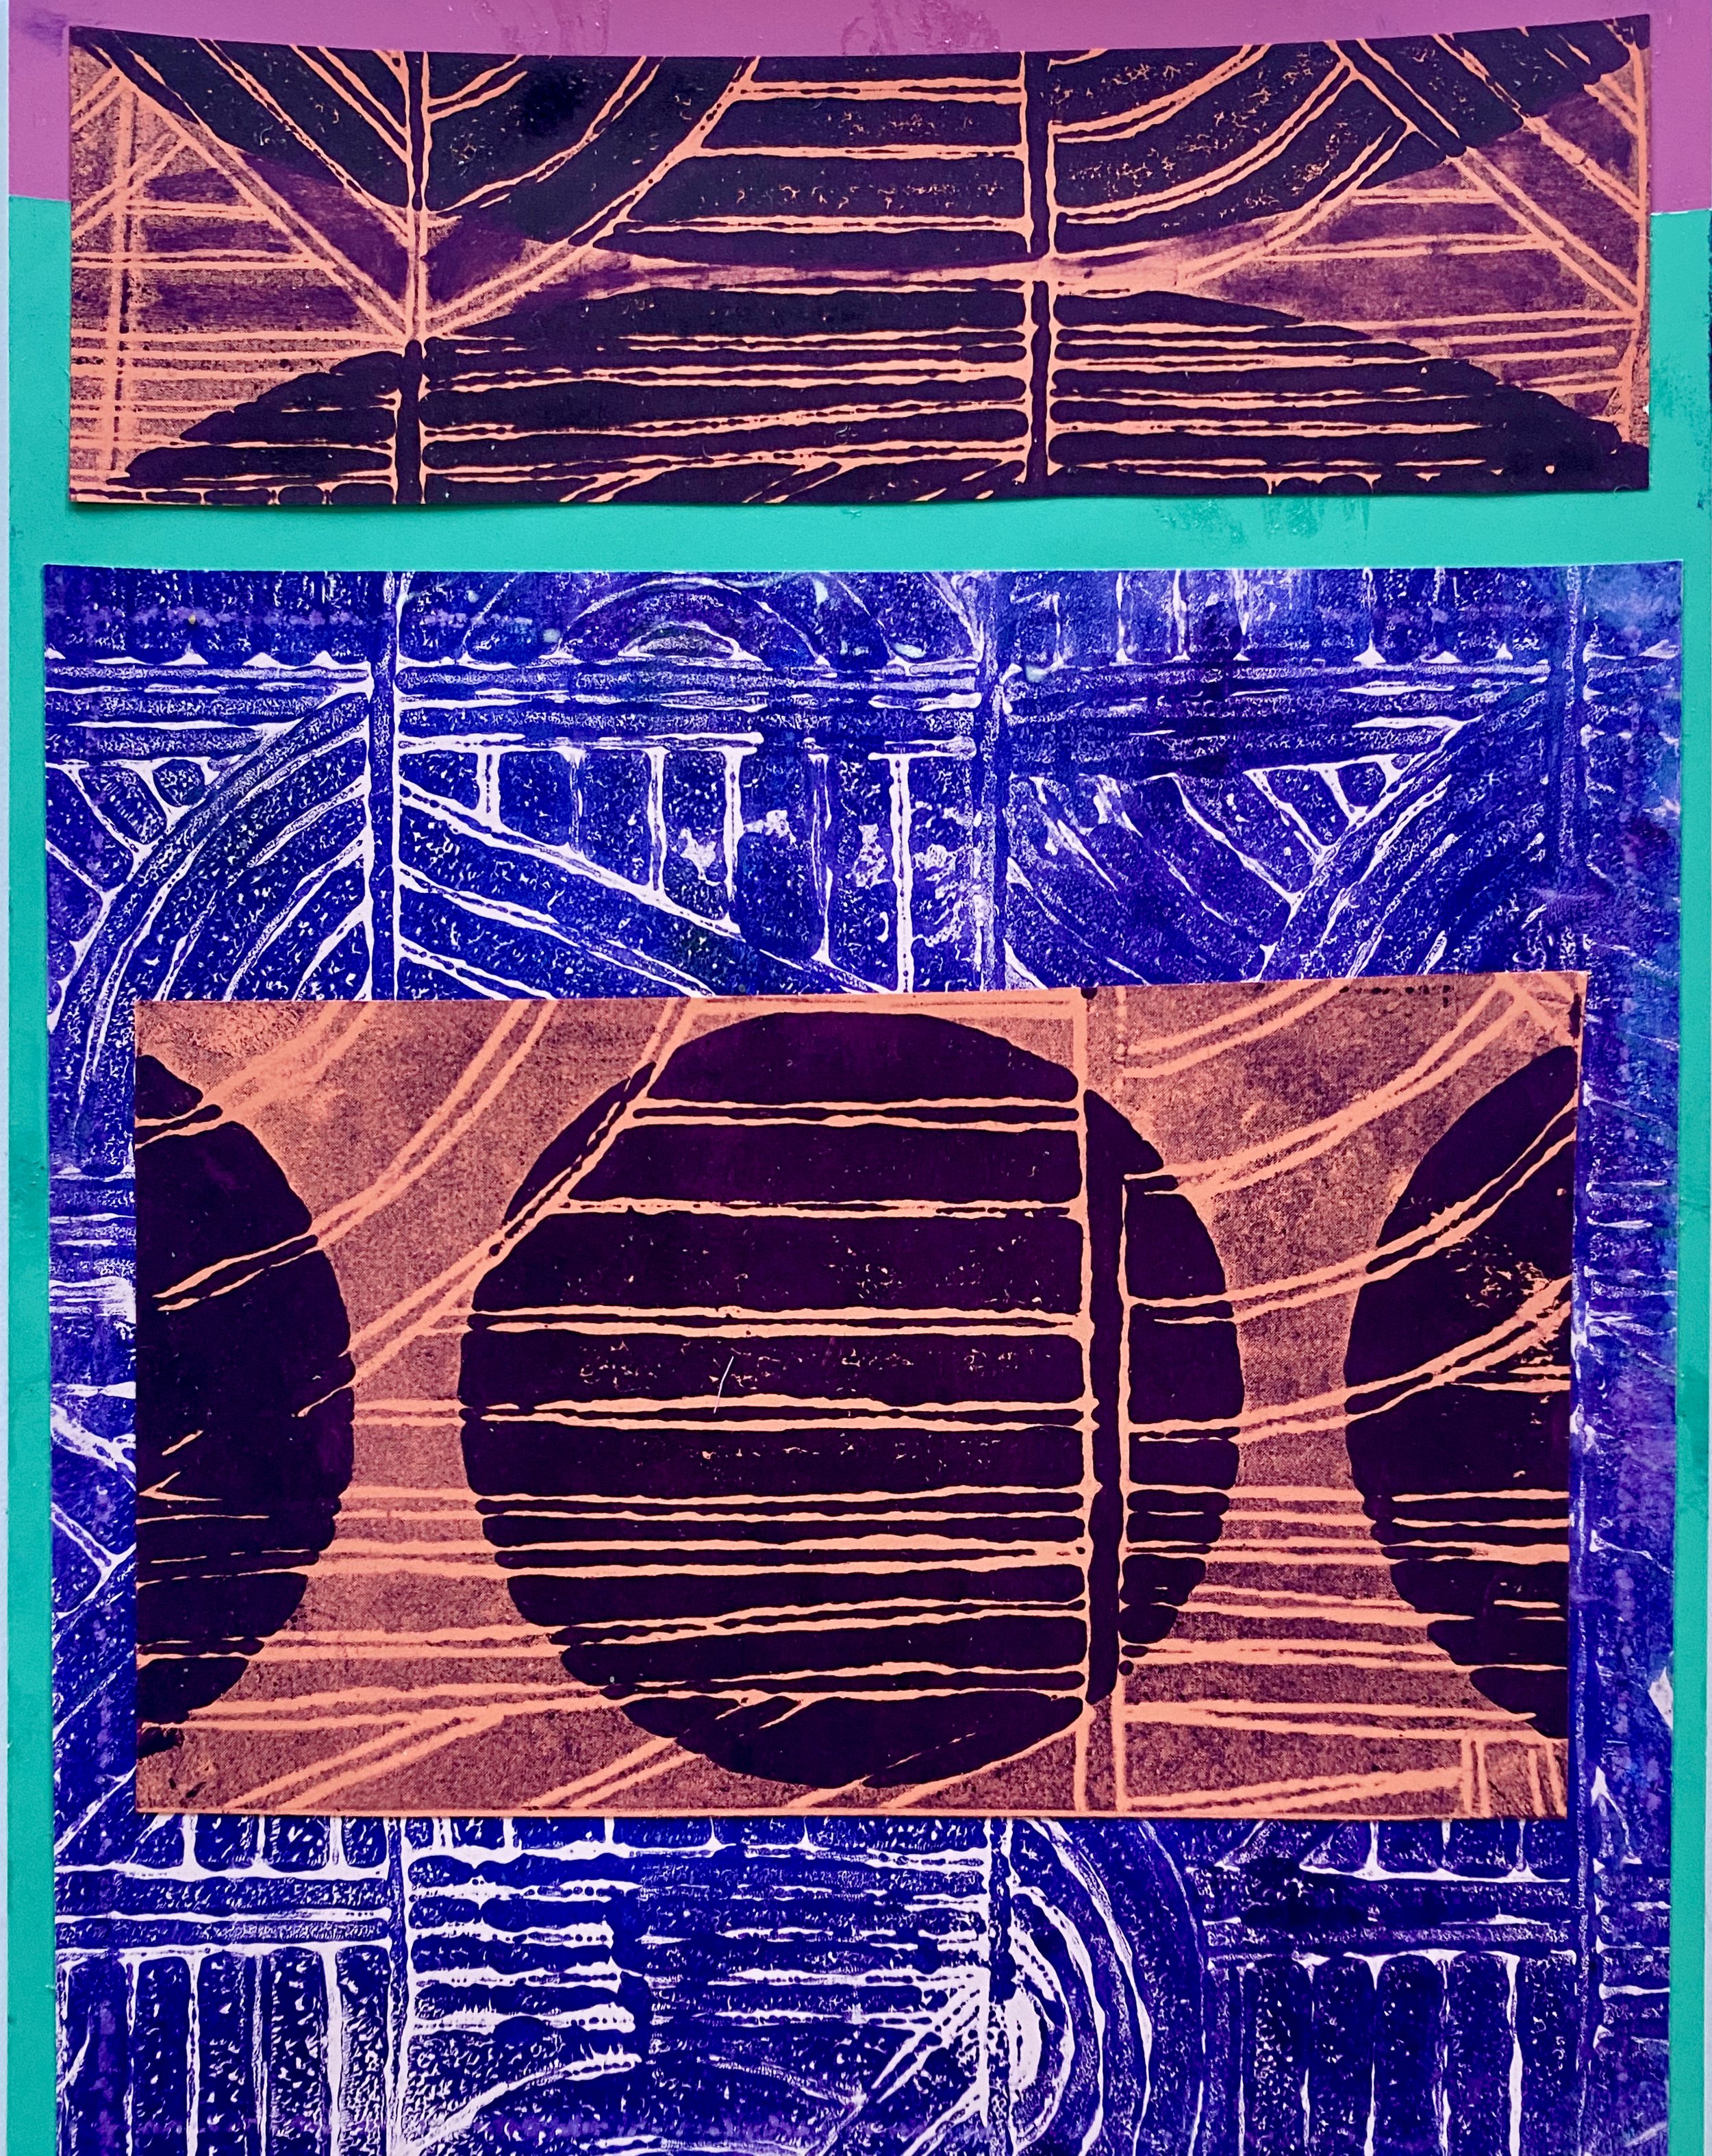 Rattan Color Study I, 6 x 9" collaged lithograph